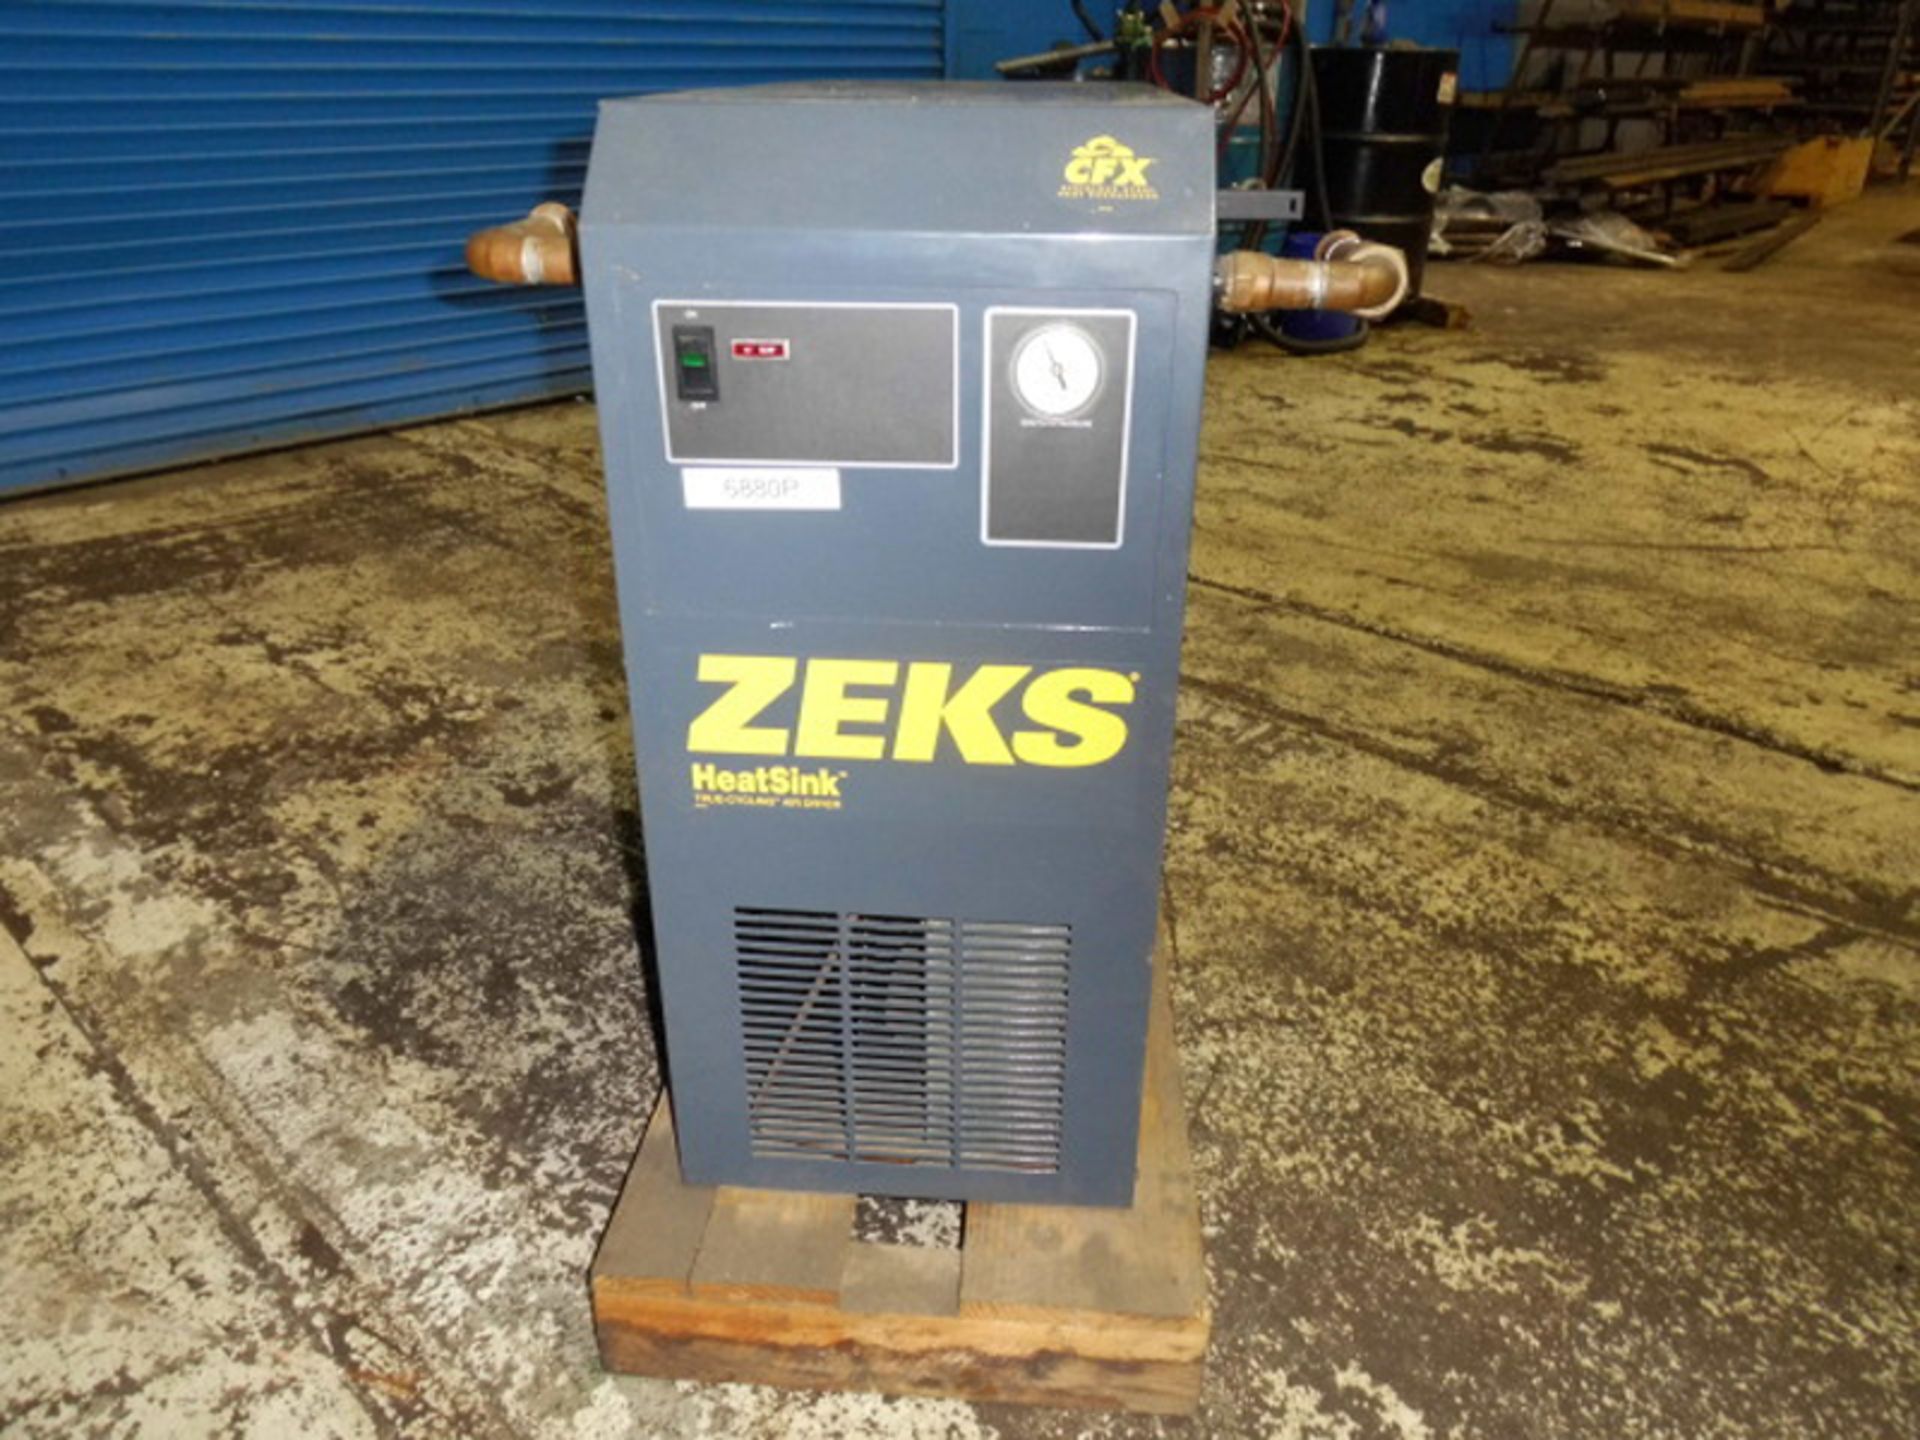 Zeks Heat Sink Refrigerated Air Dryer | 75 CFM x 200 PSIS, Mdl: 75SGA100, S/N: 270901, Located In: